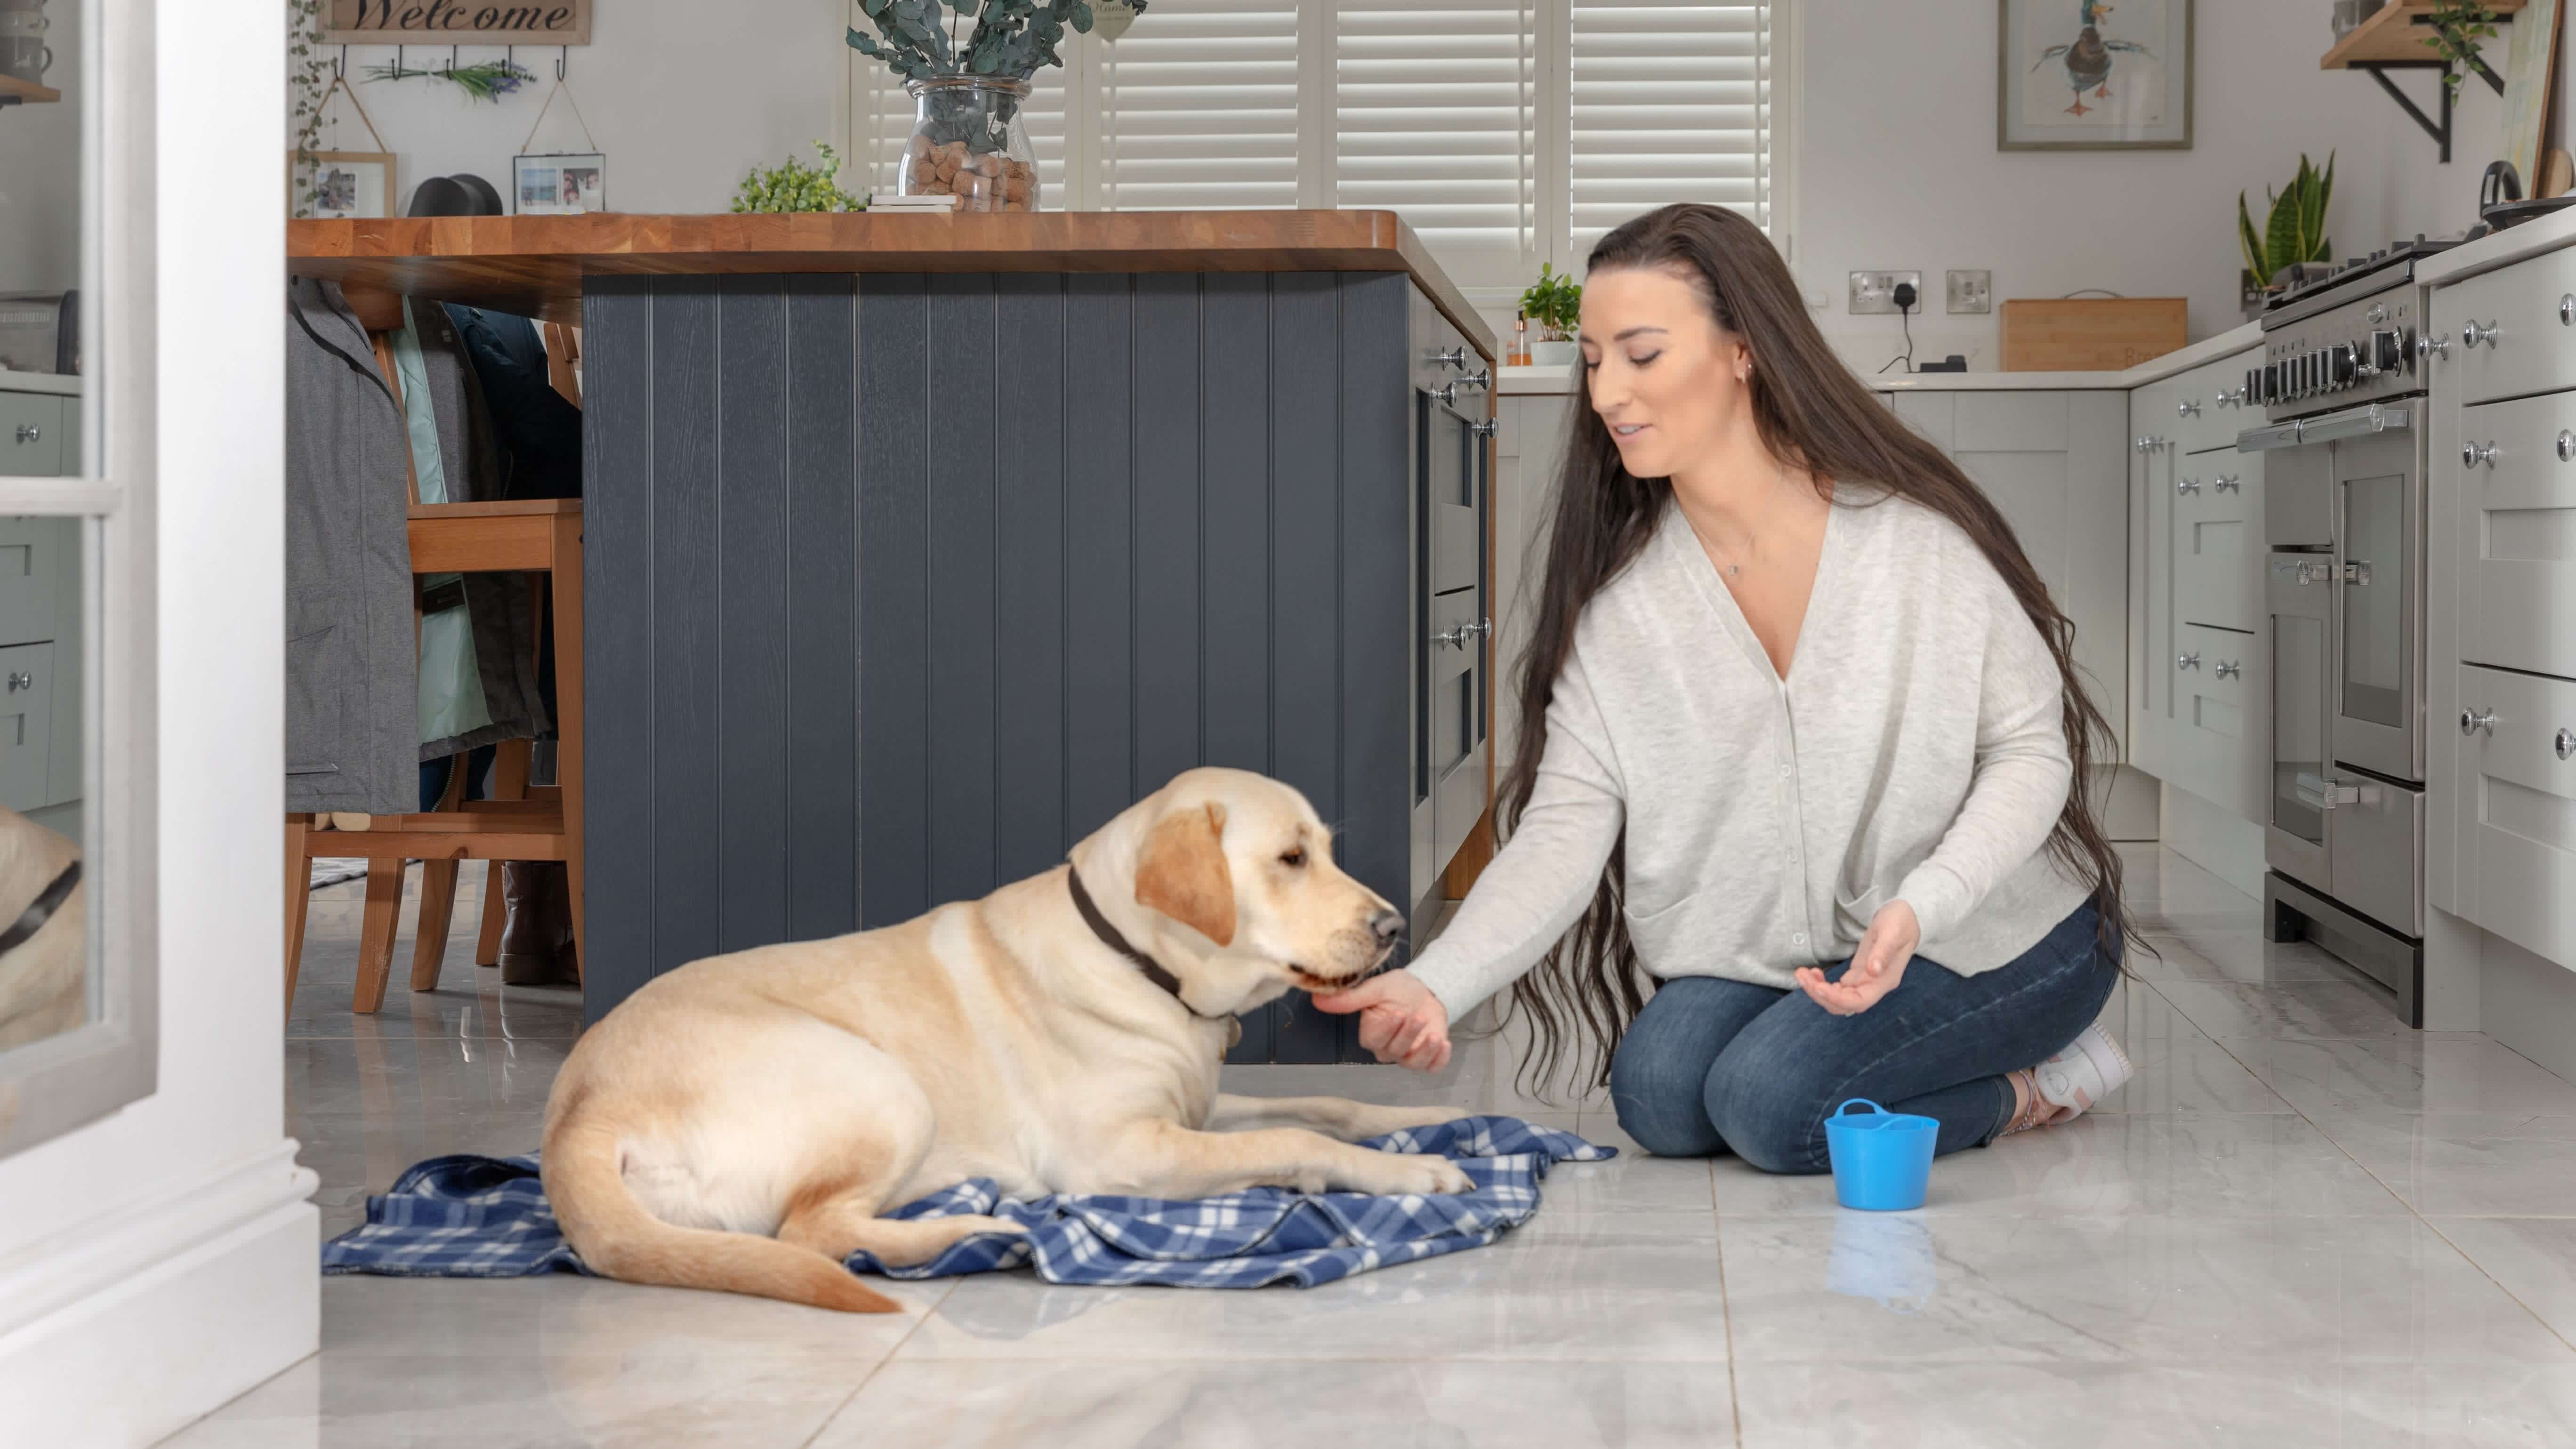 A puppy raiser cares for a yellow guide dog puppy in her kitchen, feeding the dog treats from a small blue bucket while the puppy lies down on a blanket